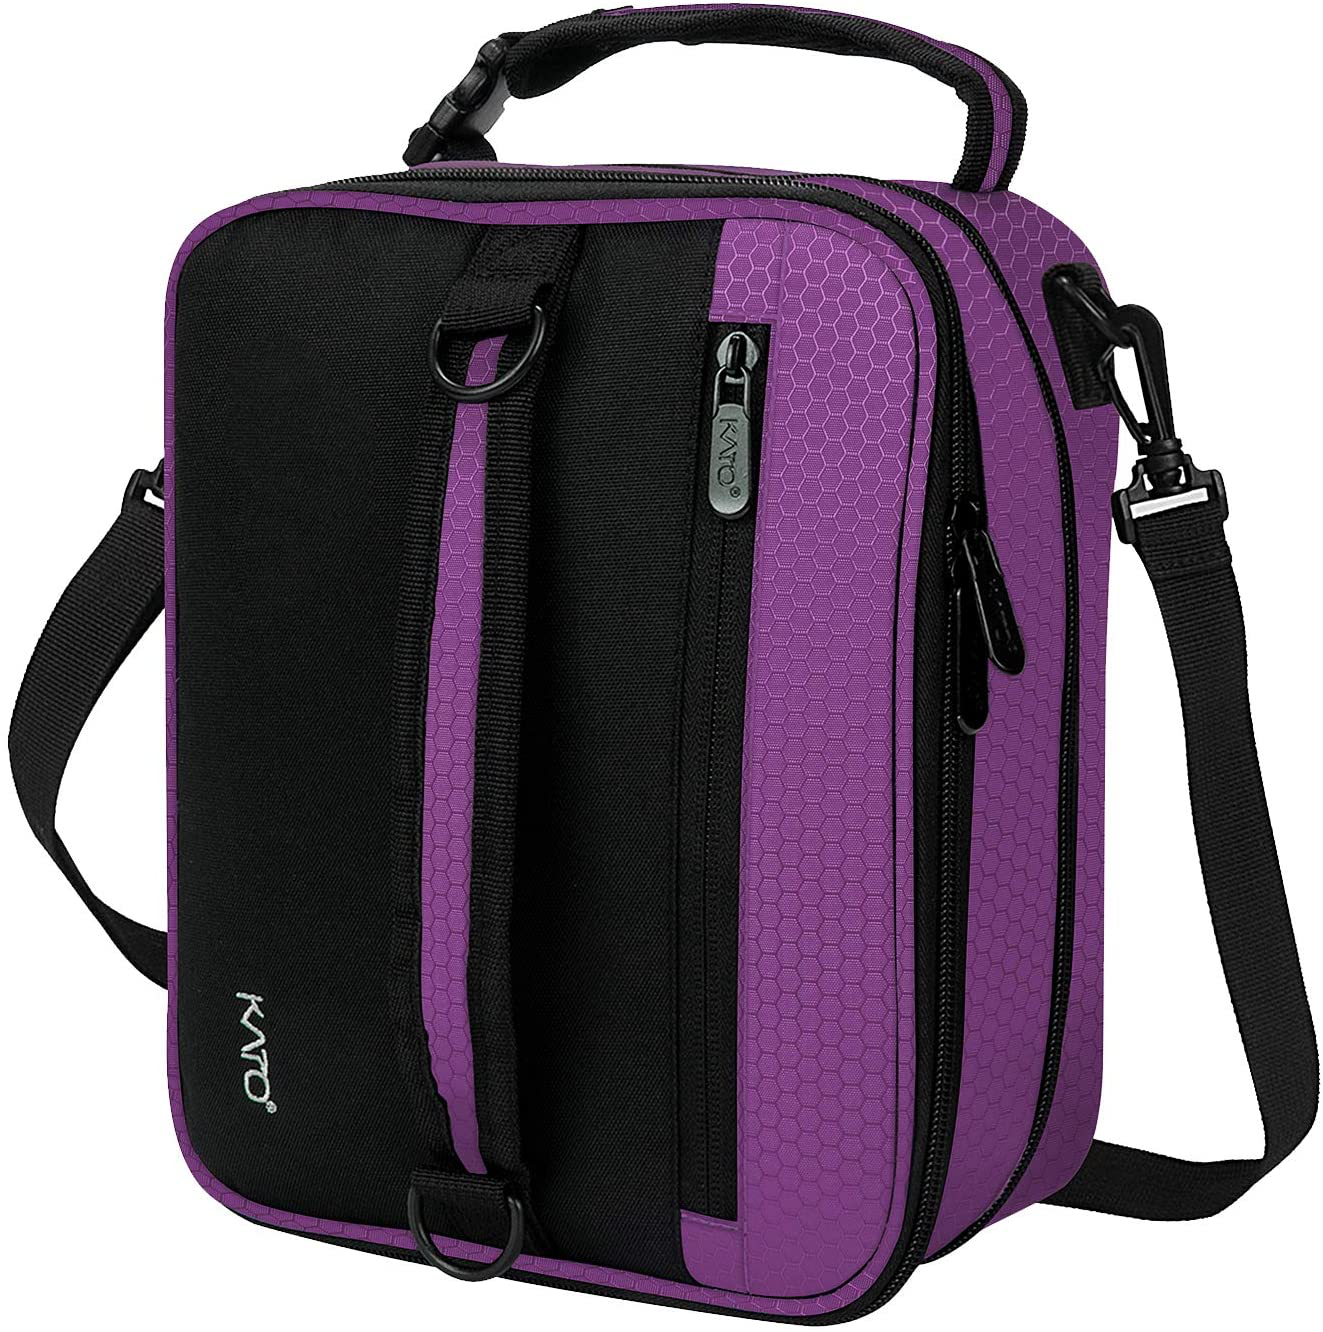 Expandable Insulated Lunch Bag, Leakproof Flat Lunch Cooler Tote with Shoulder Strap for Men and Women, Suitable for Work & Office by Tirrinia, Purple